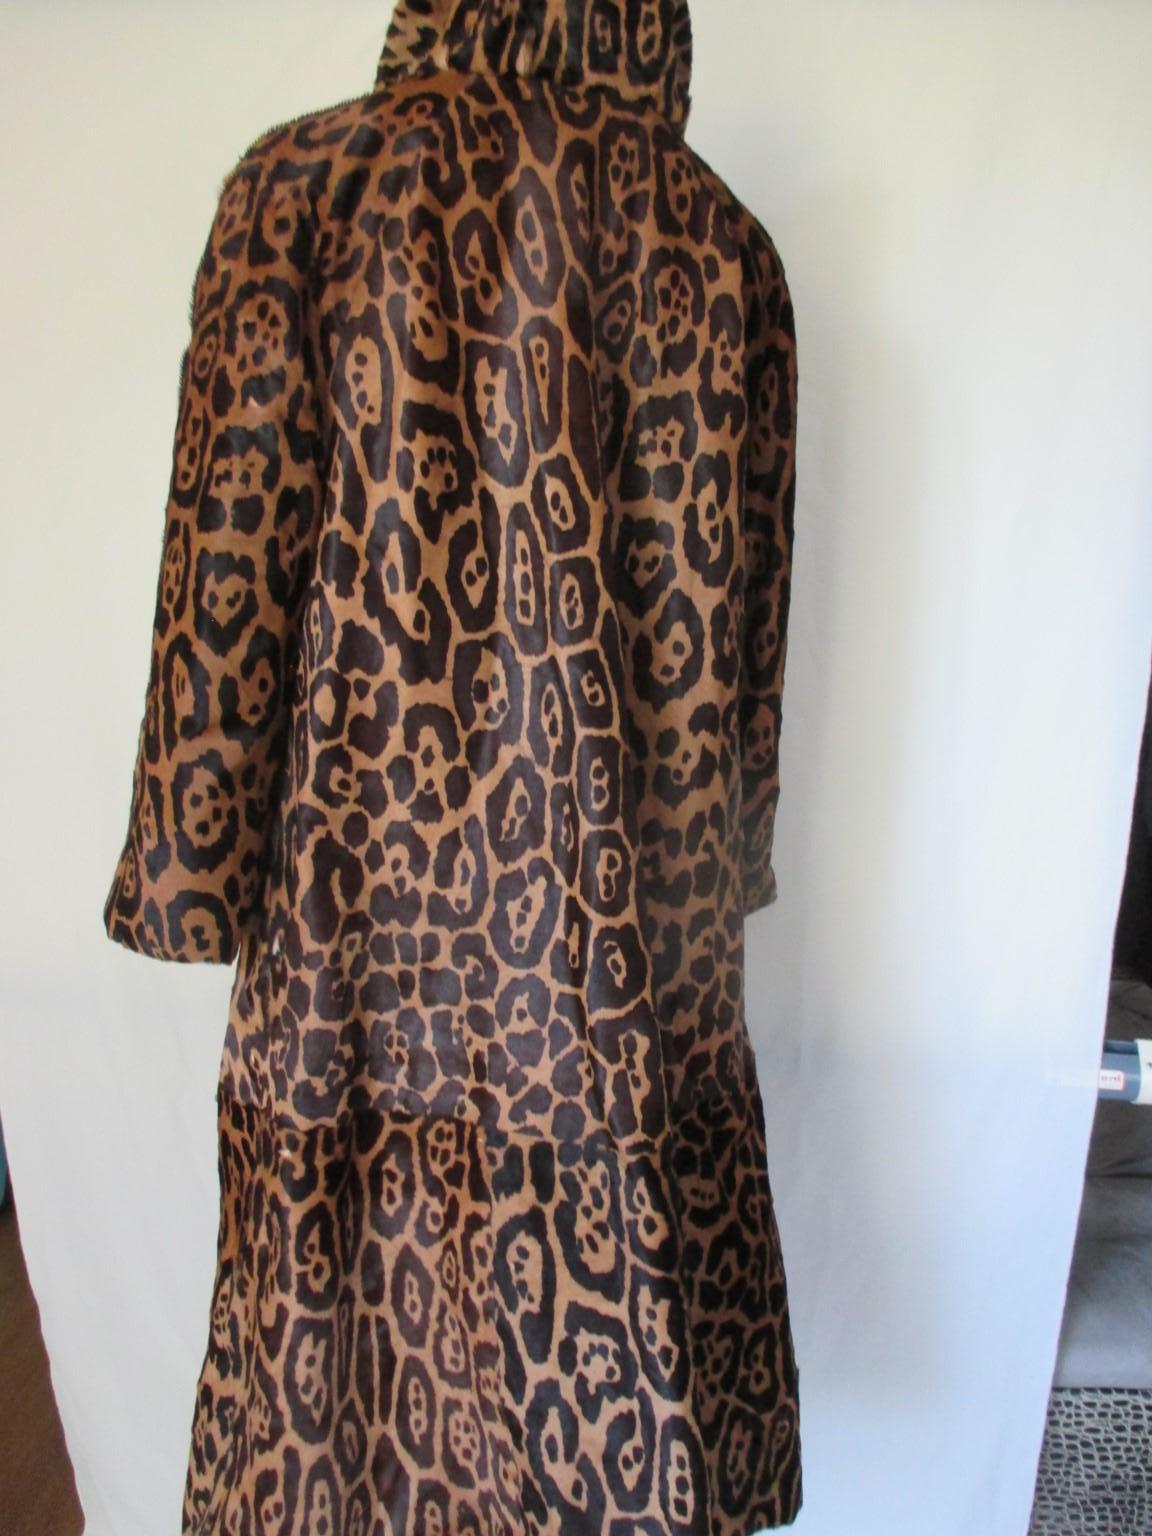 This rare vintage coat is made of dyed printed pony hair fur in leopard print.

We offer more exclusive fur items, view our frontstore.

Details:
Reversible 
Black lining
No closing hooks/buttons, each side 2 pockets
High collar
Pre owned condition